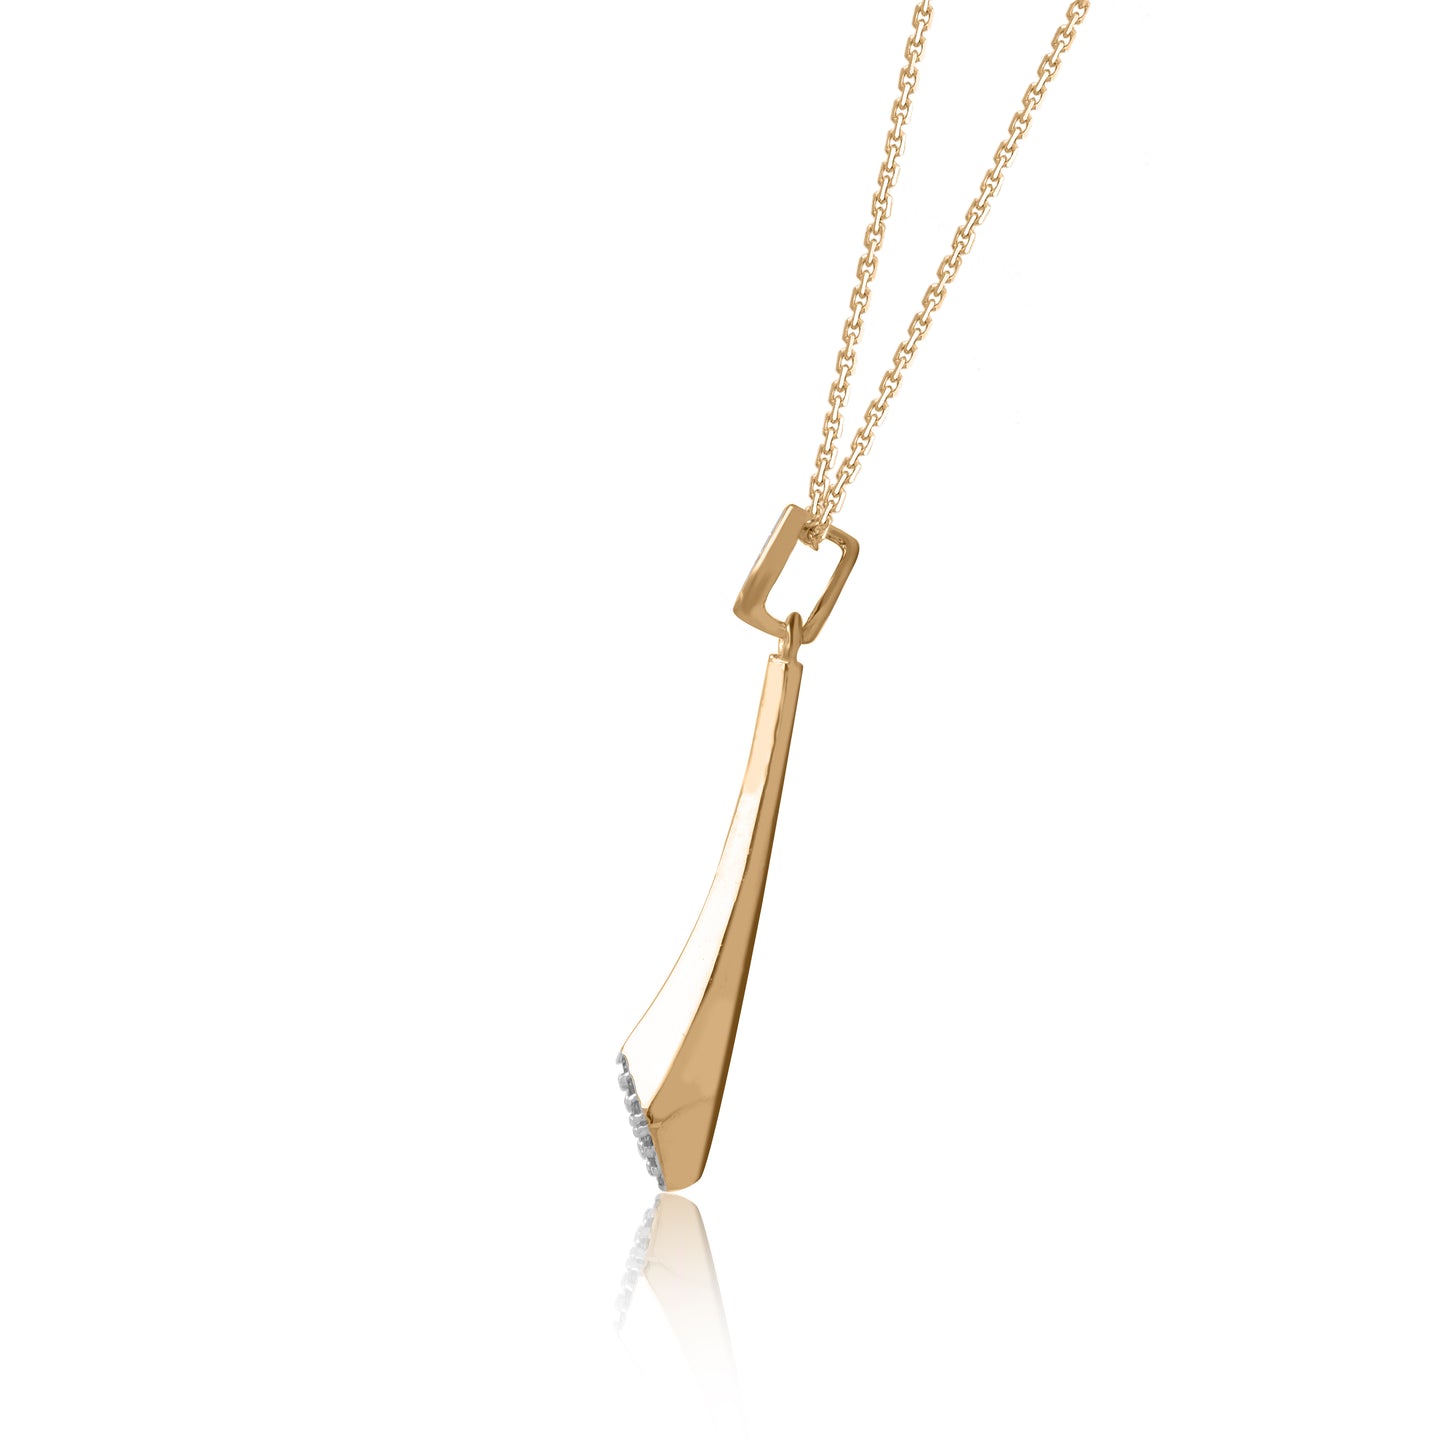 Stylish Vertical Bar Pendant Necklace in Gold Plated 925 Sterling Silver